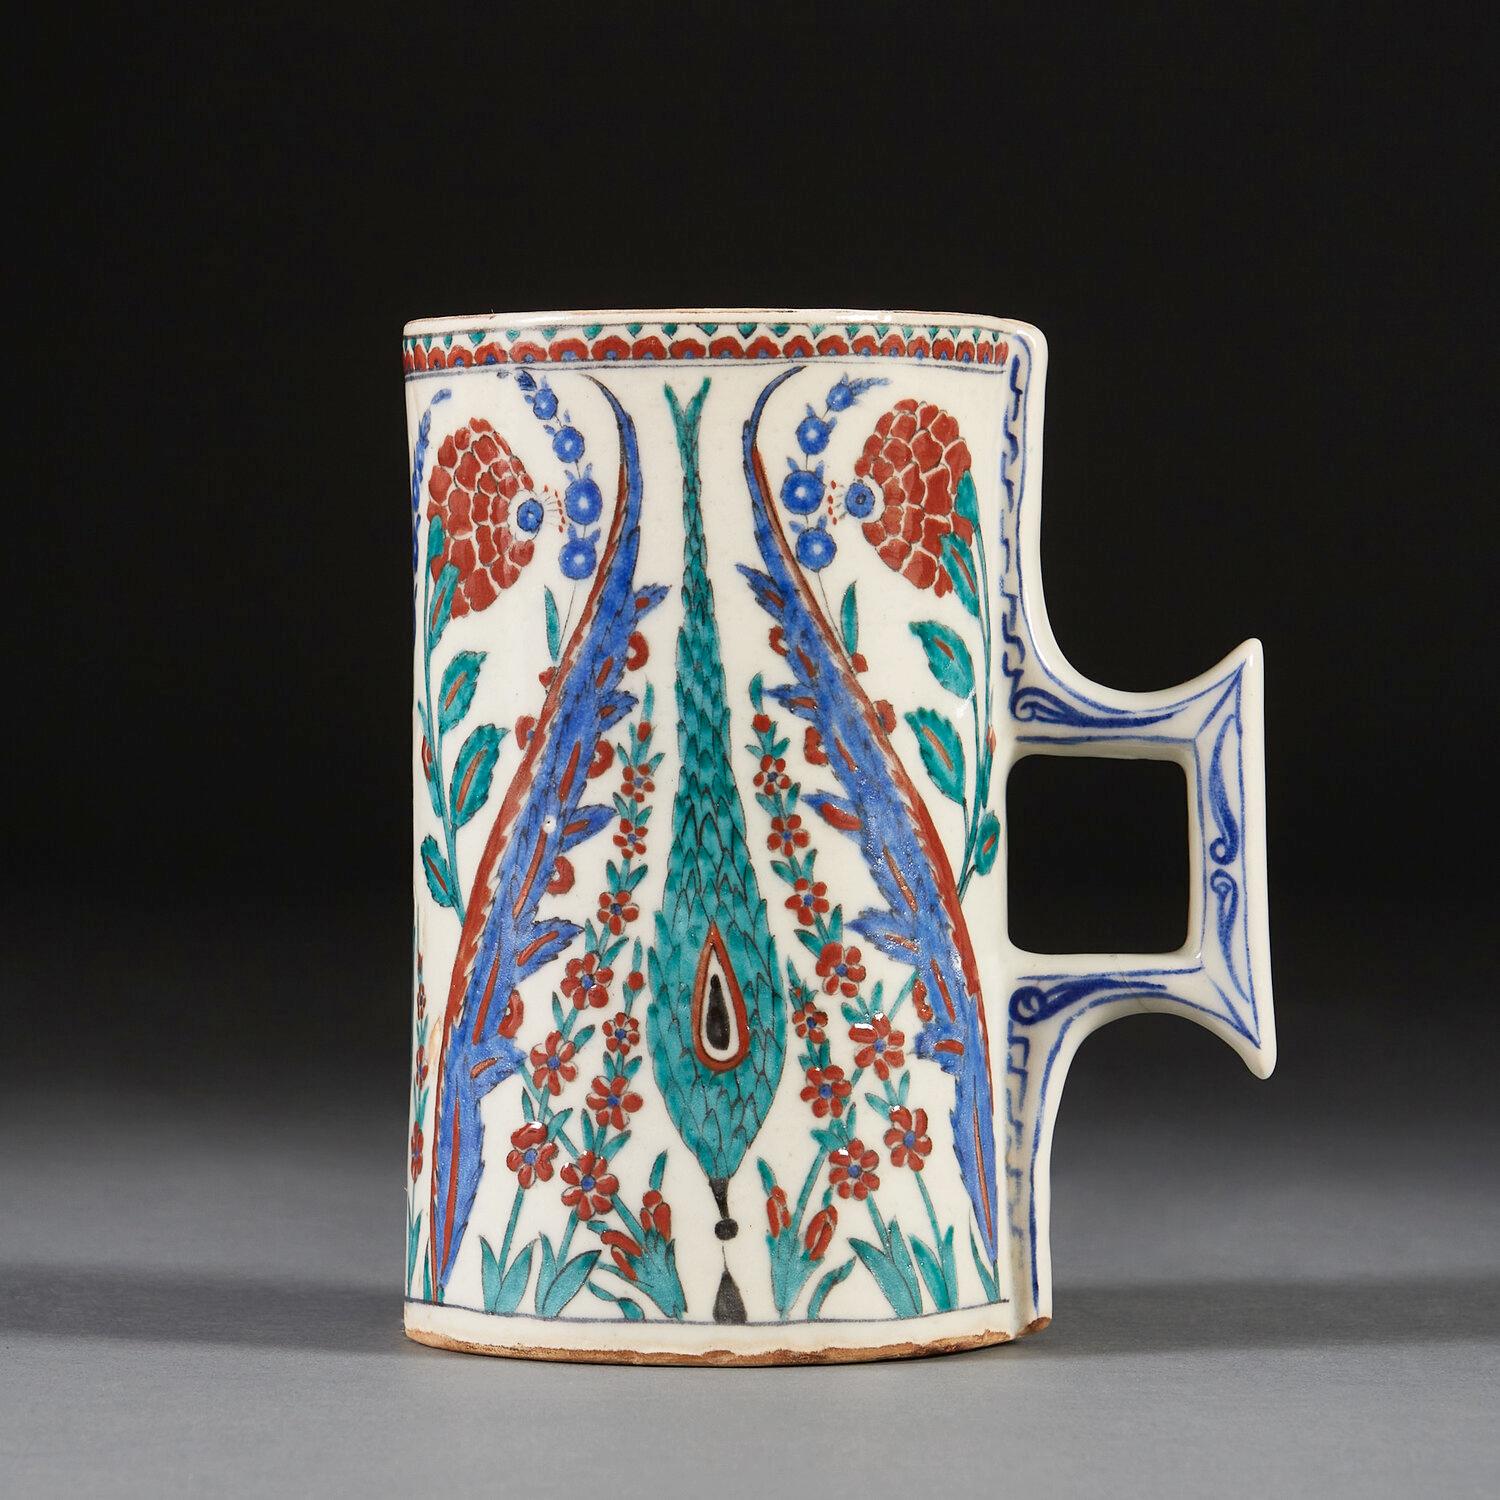 A mid-nineteenth century Samson pottery jug of large scale, decorated in the Iznik style with a white ground overlaid with tulips and chrysanthemums.